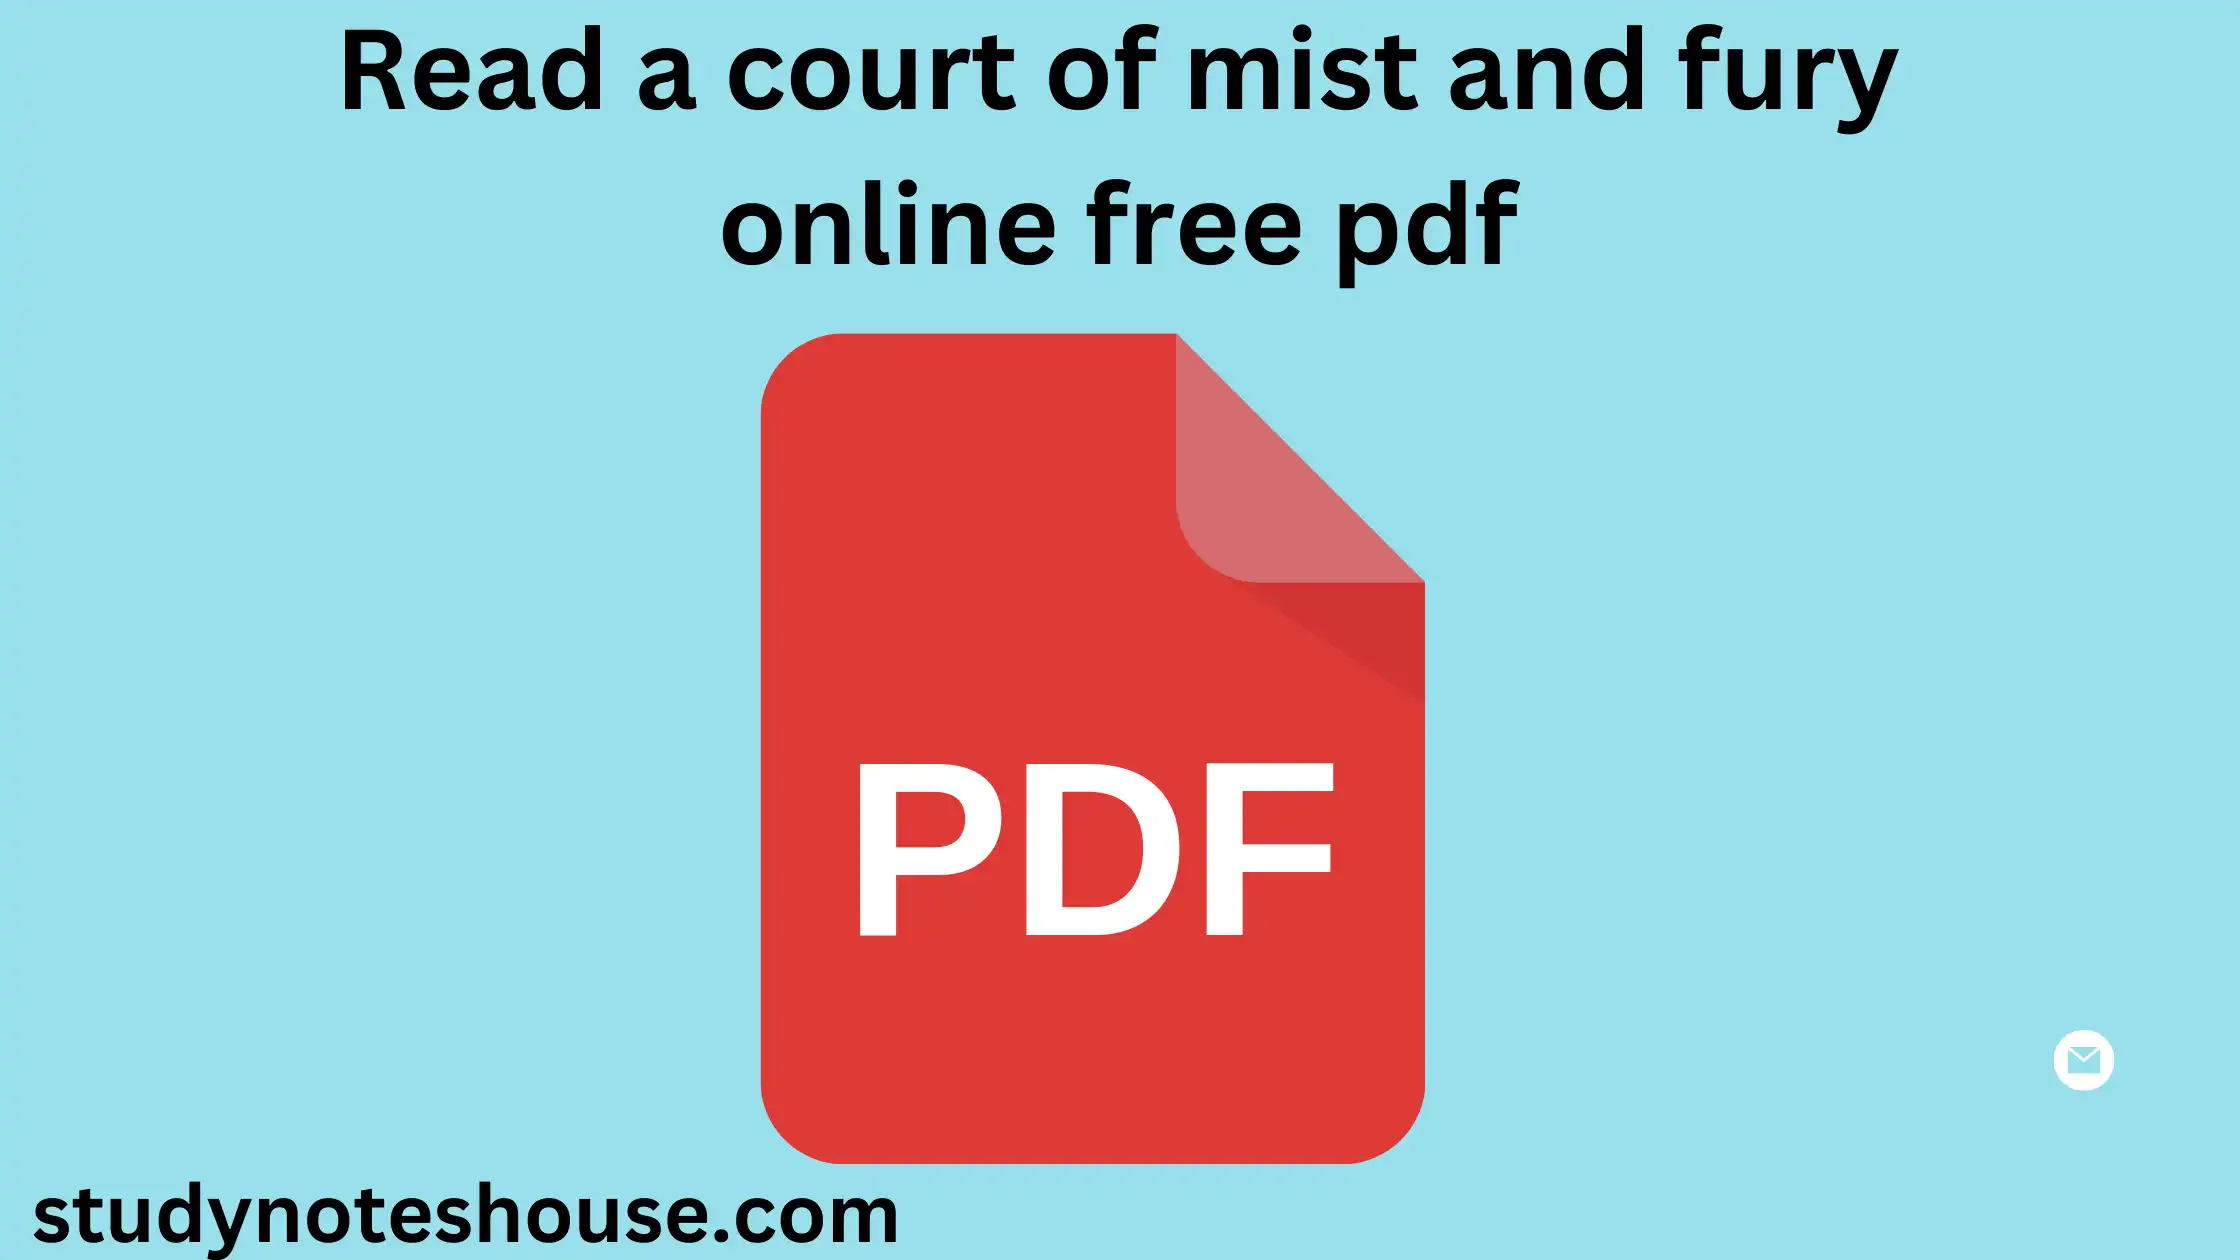 Read a court of mist and fury online free pdf